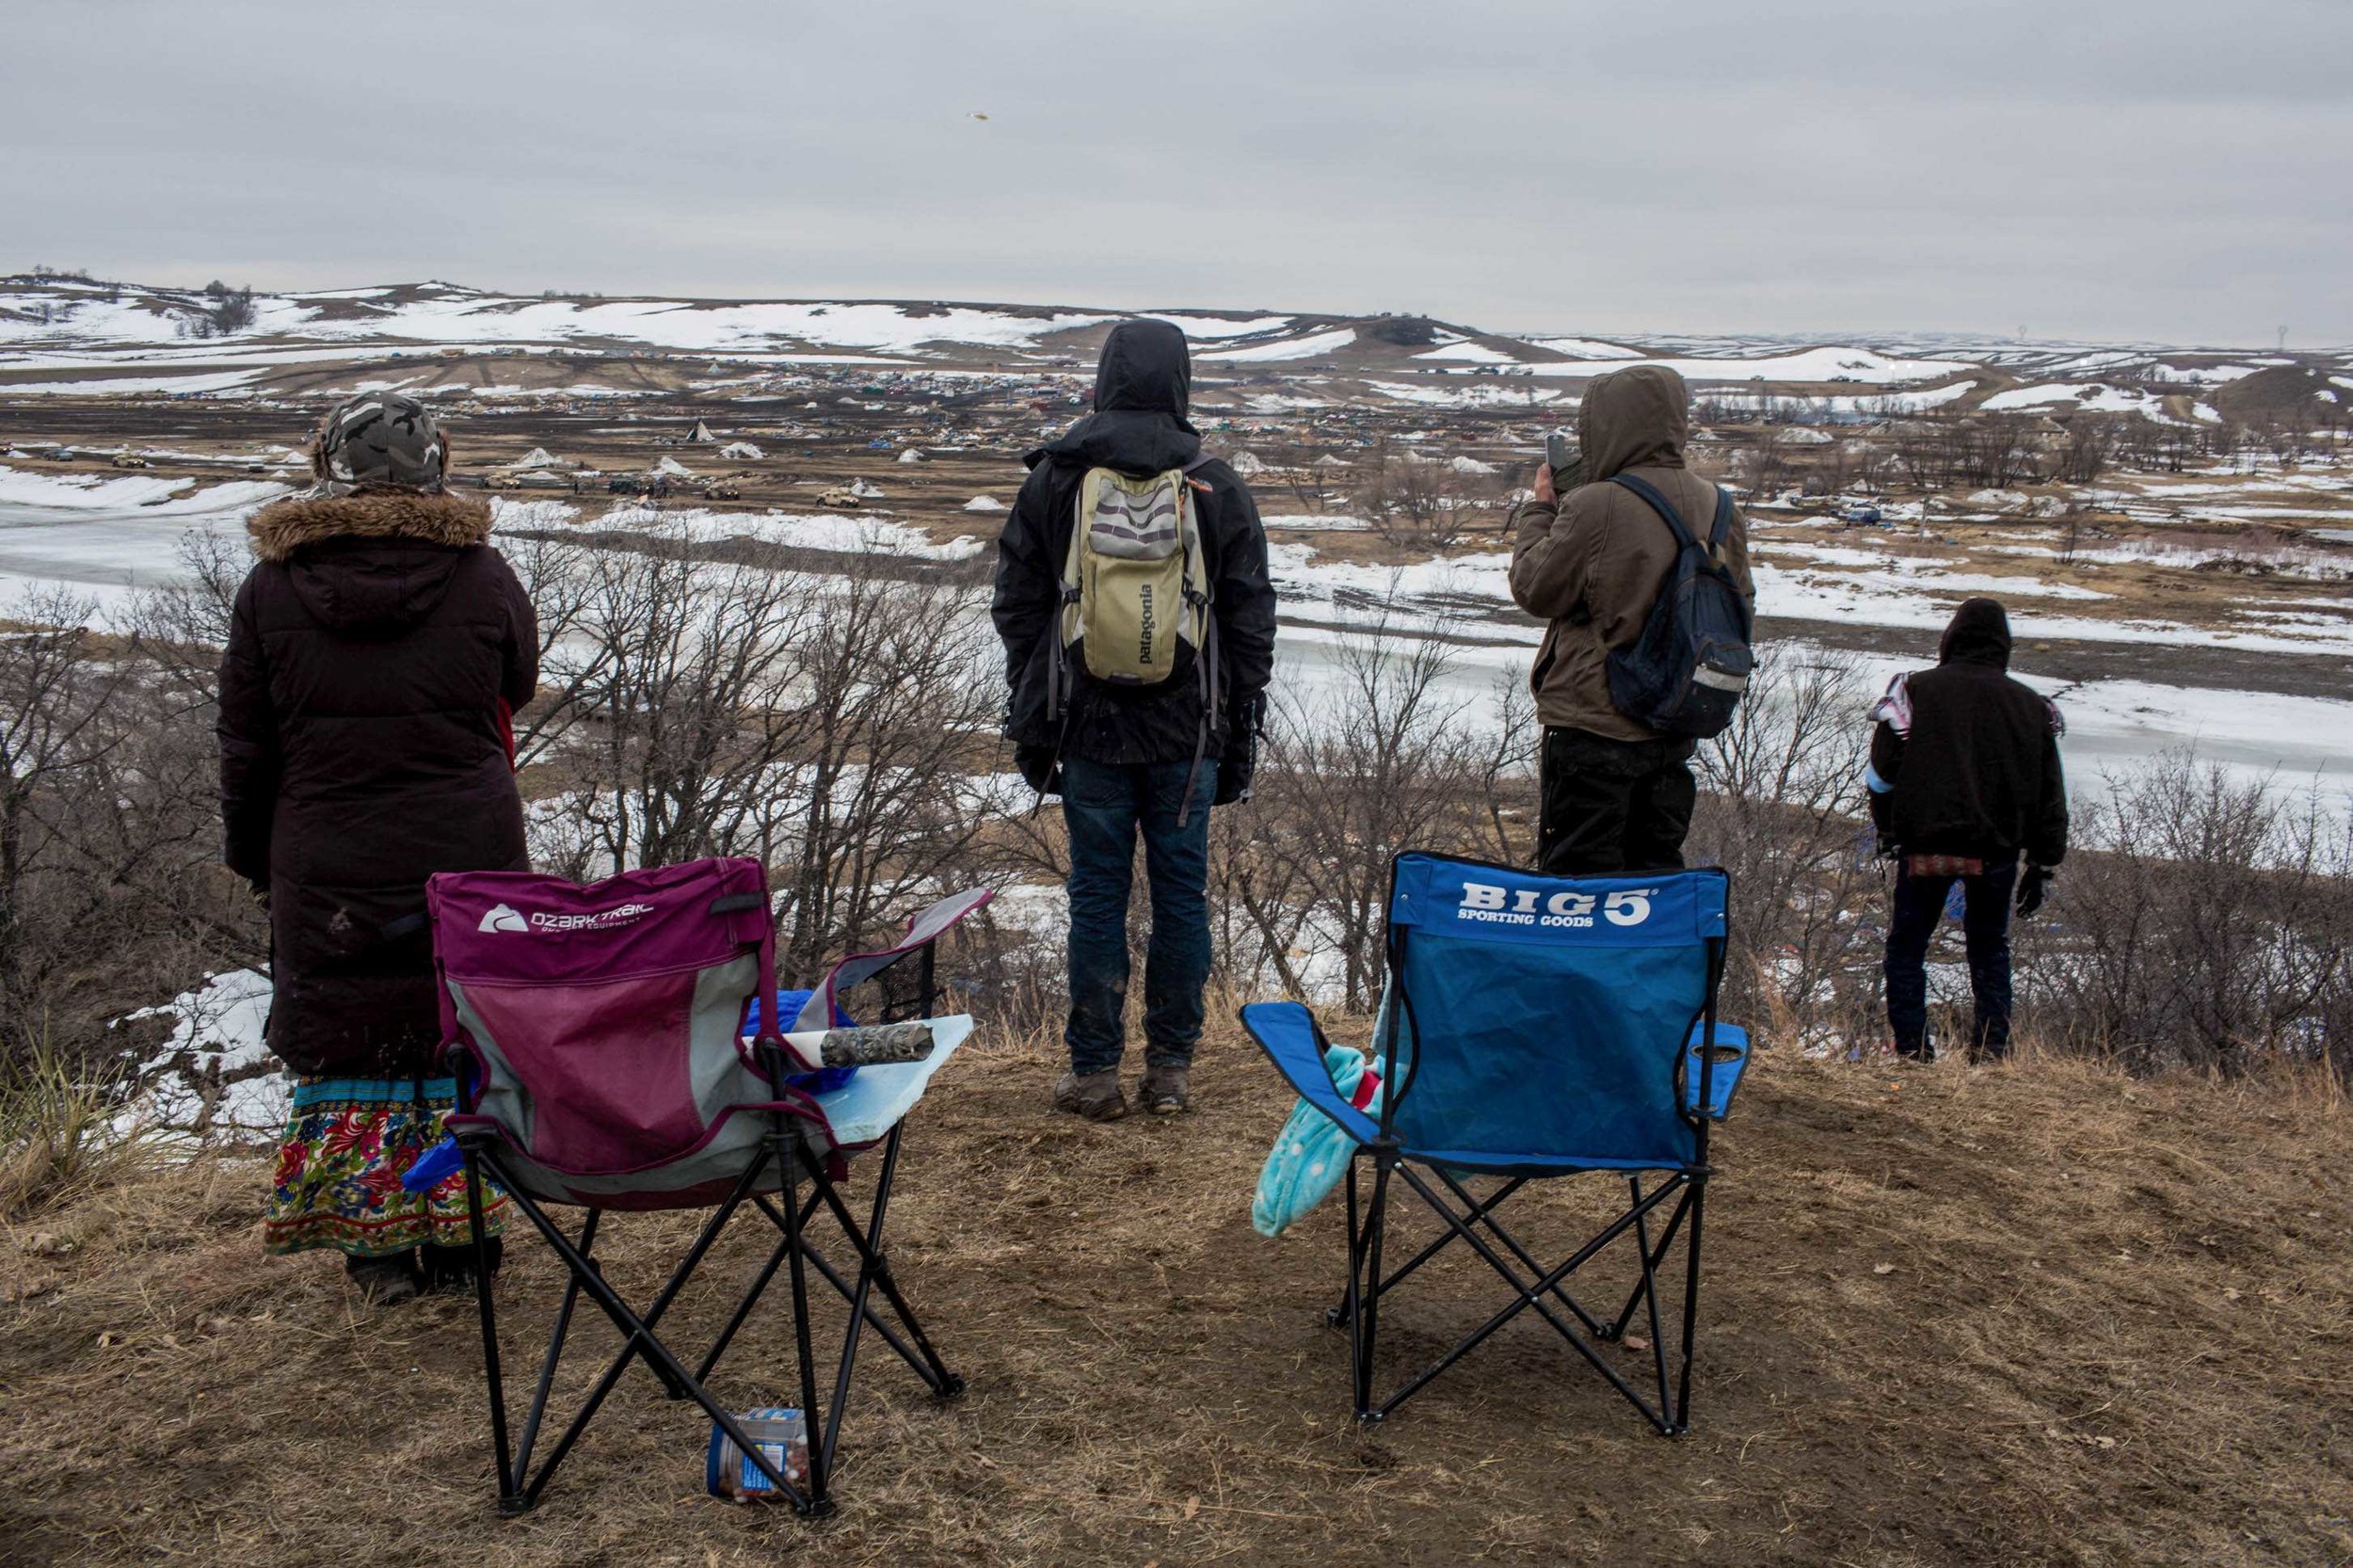  Water Protectors stand on the hill overlooking Oceti Sakowin, watching highly militarized BIA, ATF and Morton County Sheriffs bulldoze the remains of the camp several hours after the raid on Wednesday morning. Wednesday February 23rd 2017, Sacred St